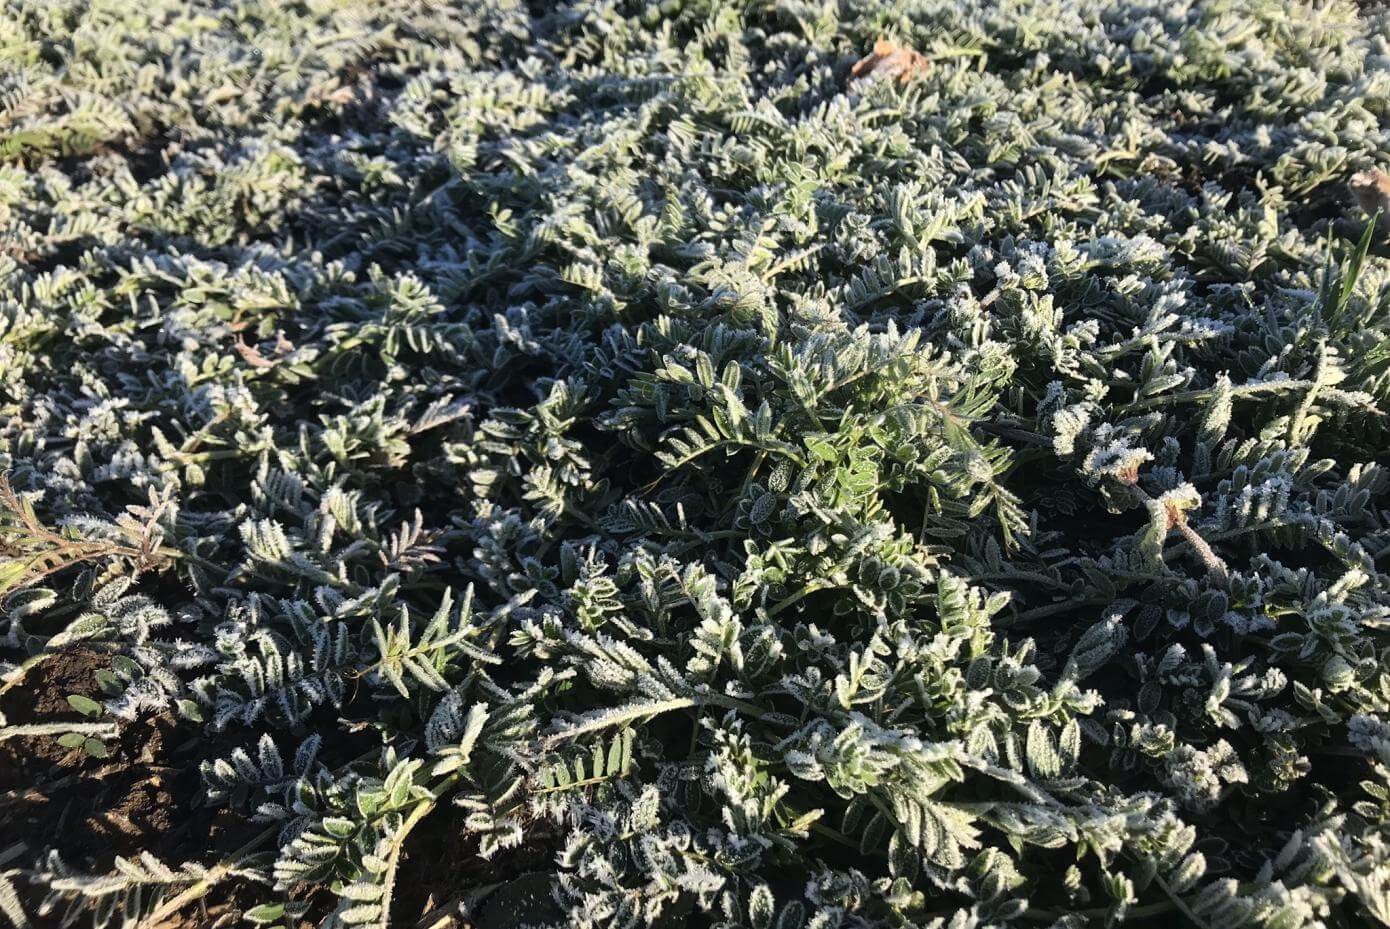 Patagona INTA showing Frost Tolerance in Argentina 07-31-18